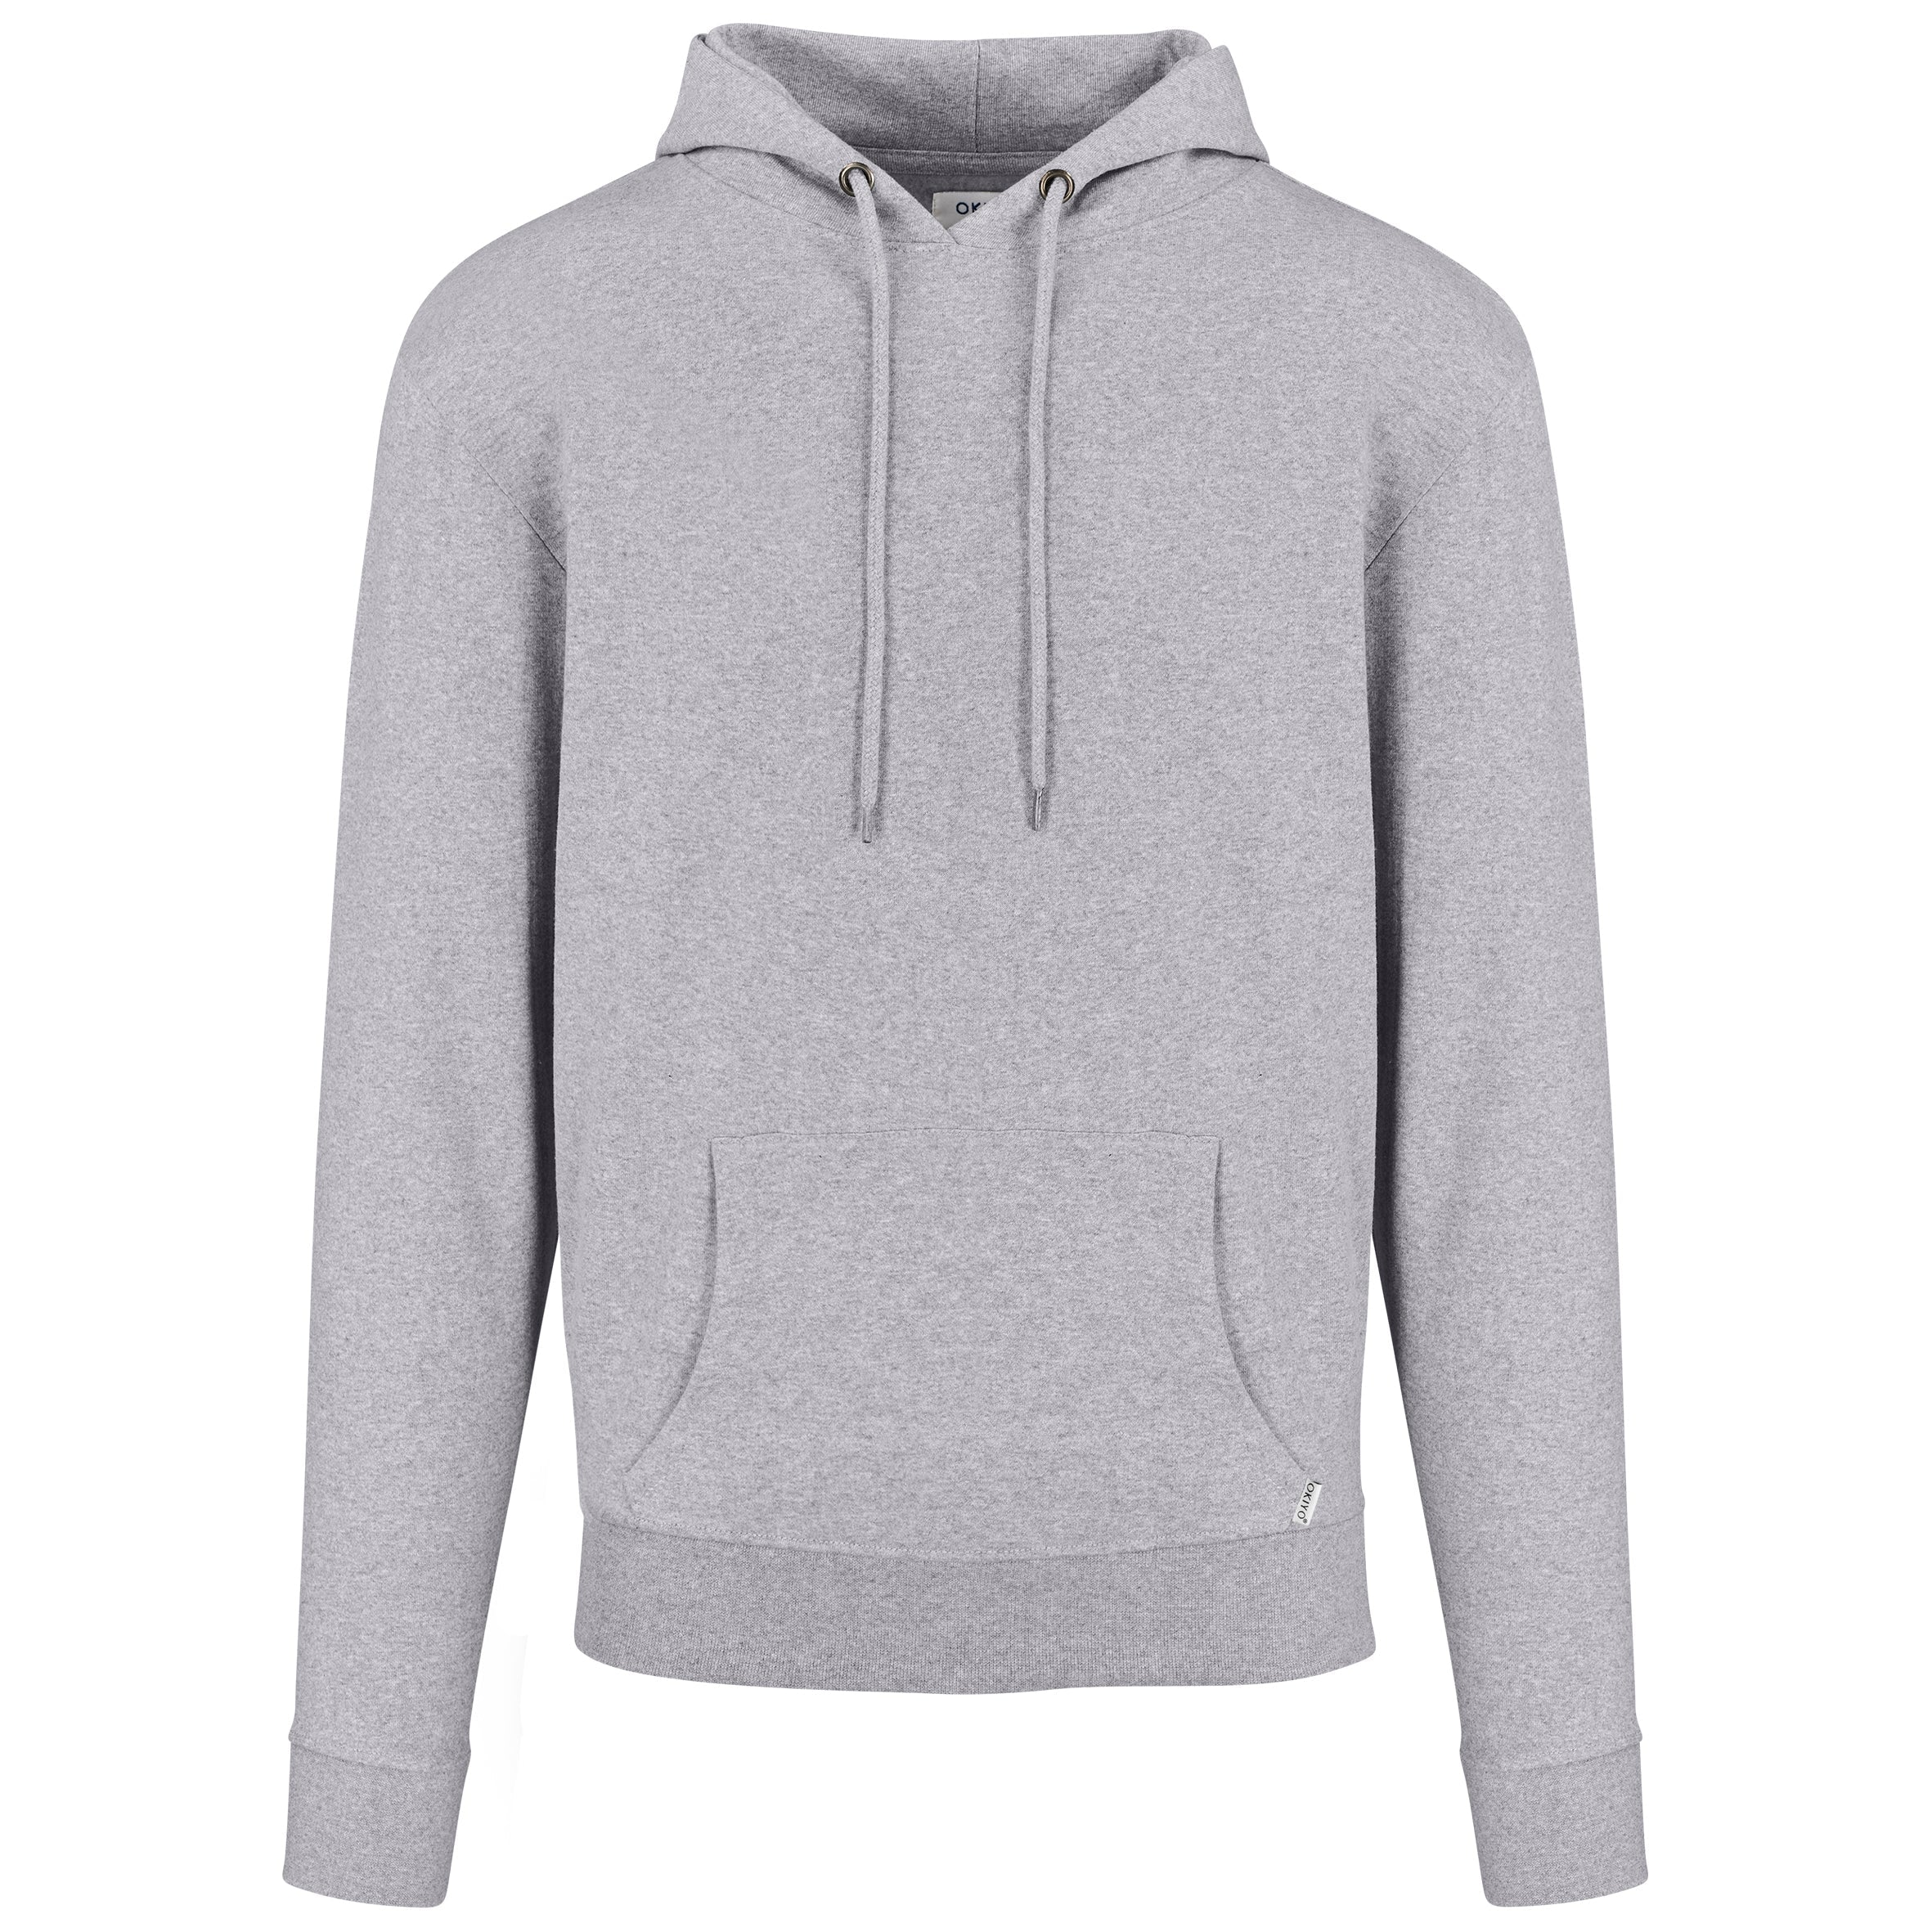 Mens Recycled Hooded Sweater L / Grey / GY